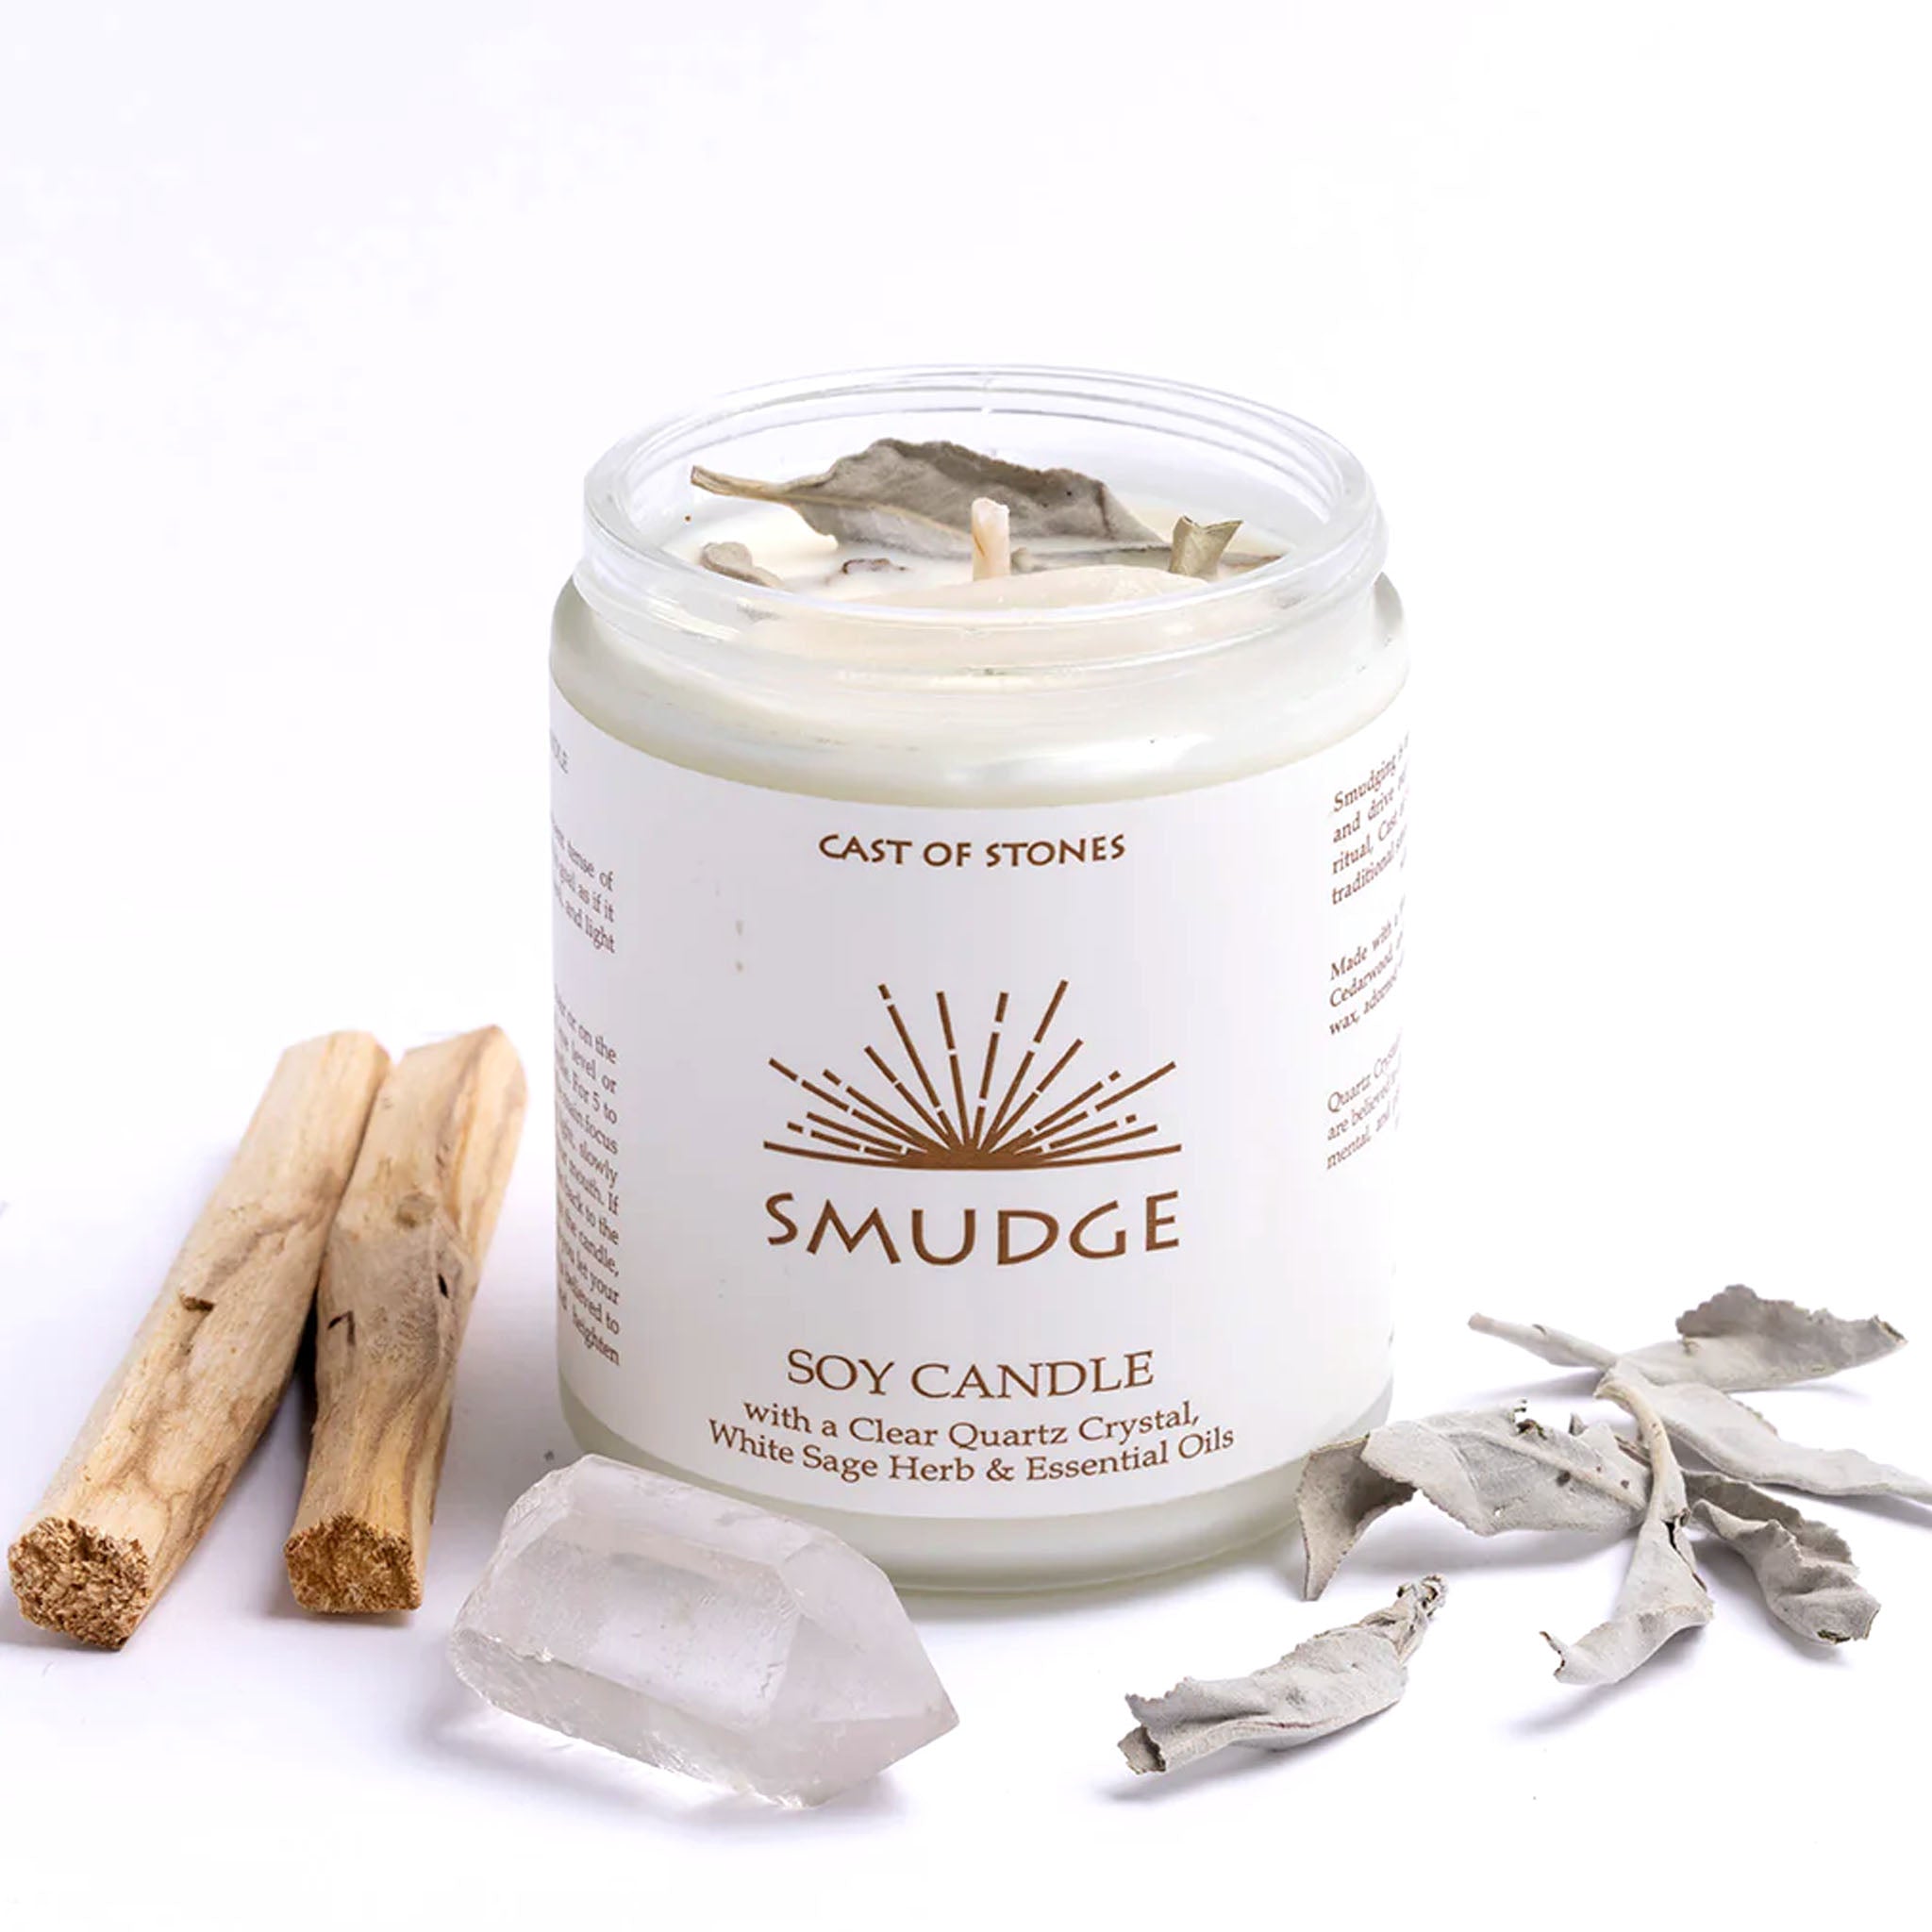 Smudge Candle with Clear Quartz Crystal, White Sage Herb, and Essential Oils